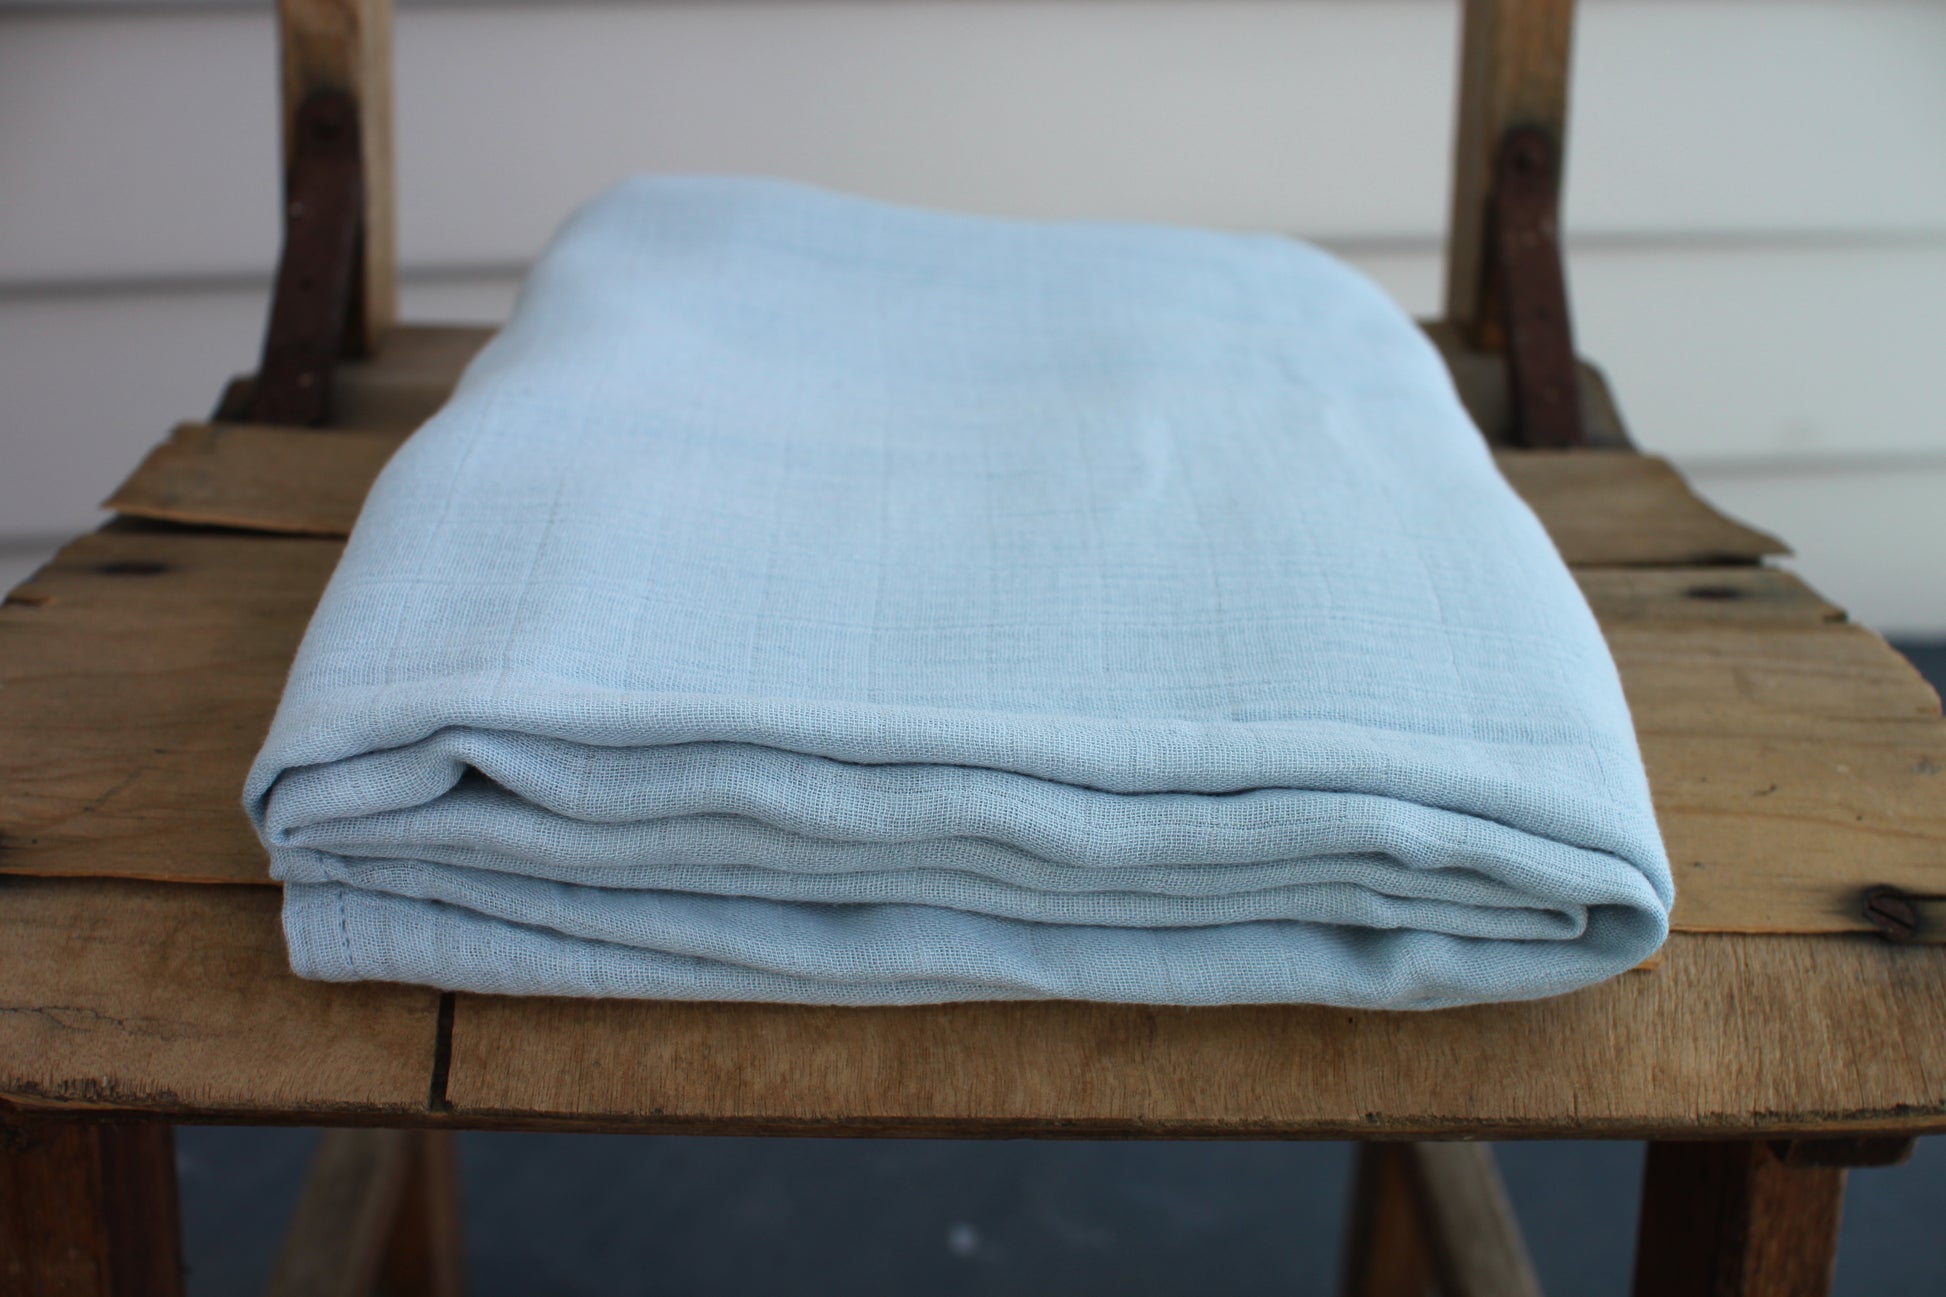 One sky blue muslin cloth sits folded on a wooden chair.